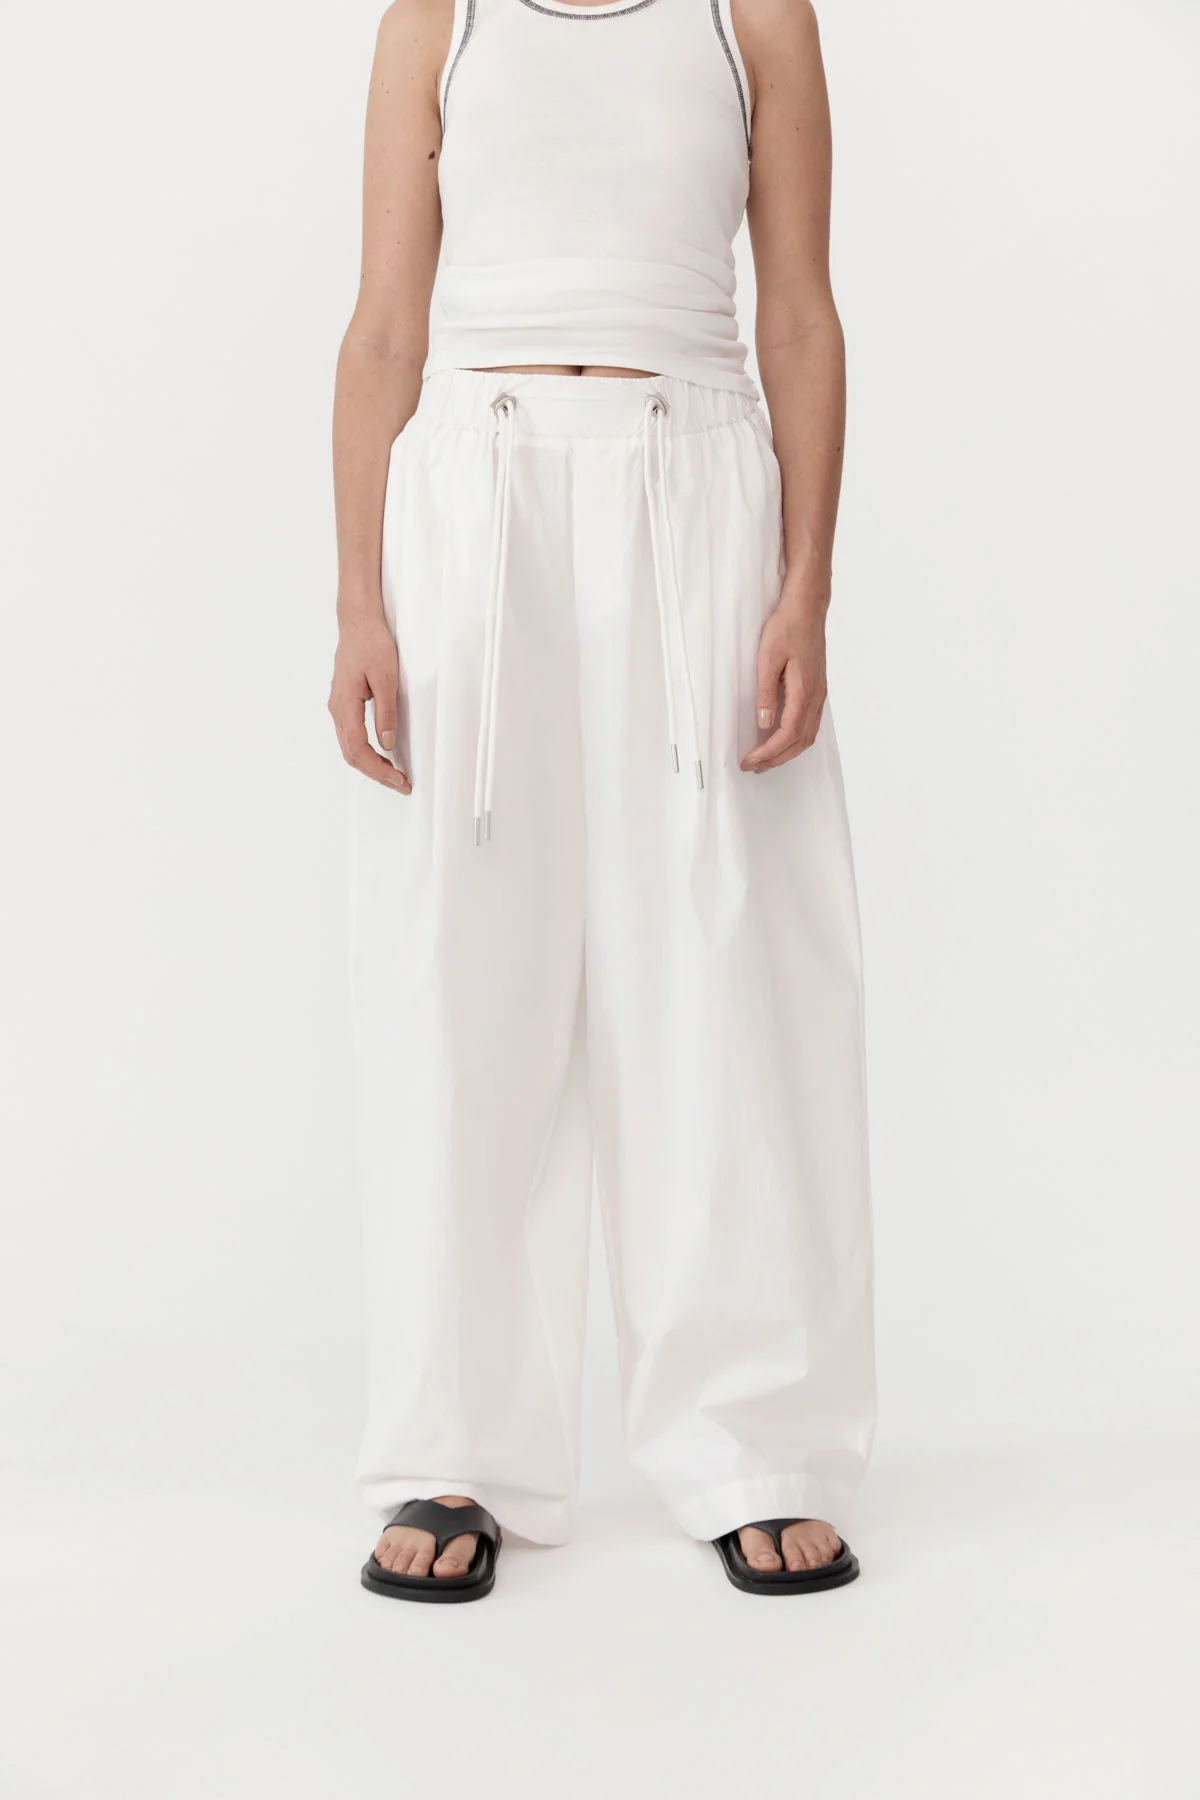 St Agni Relaxed Drawstring Pant in White available at The New Trend australia.